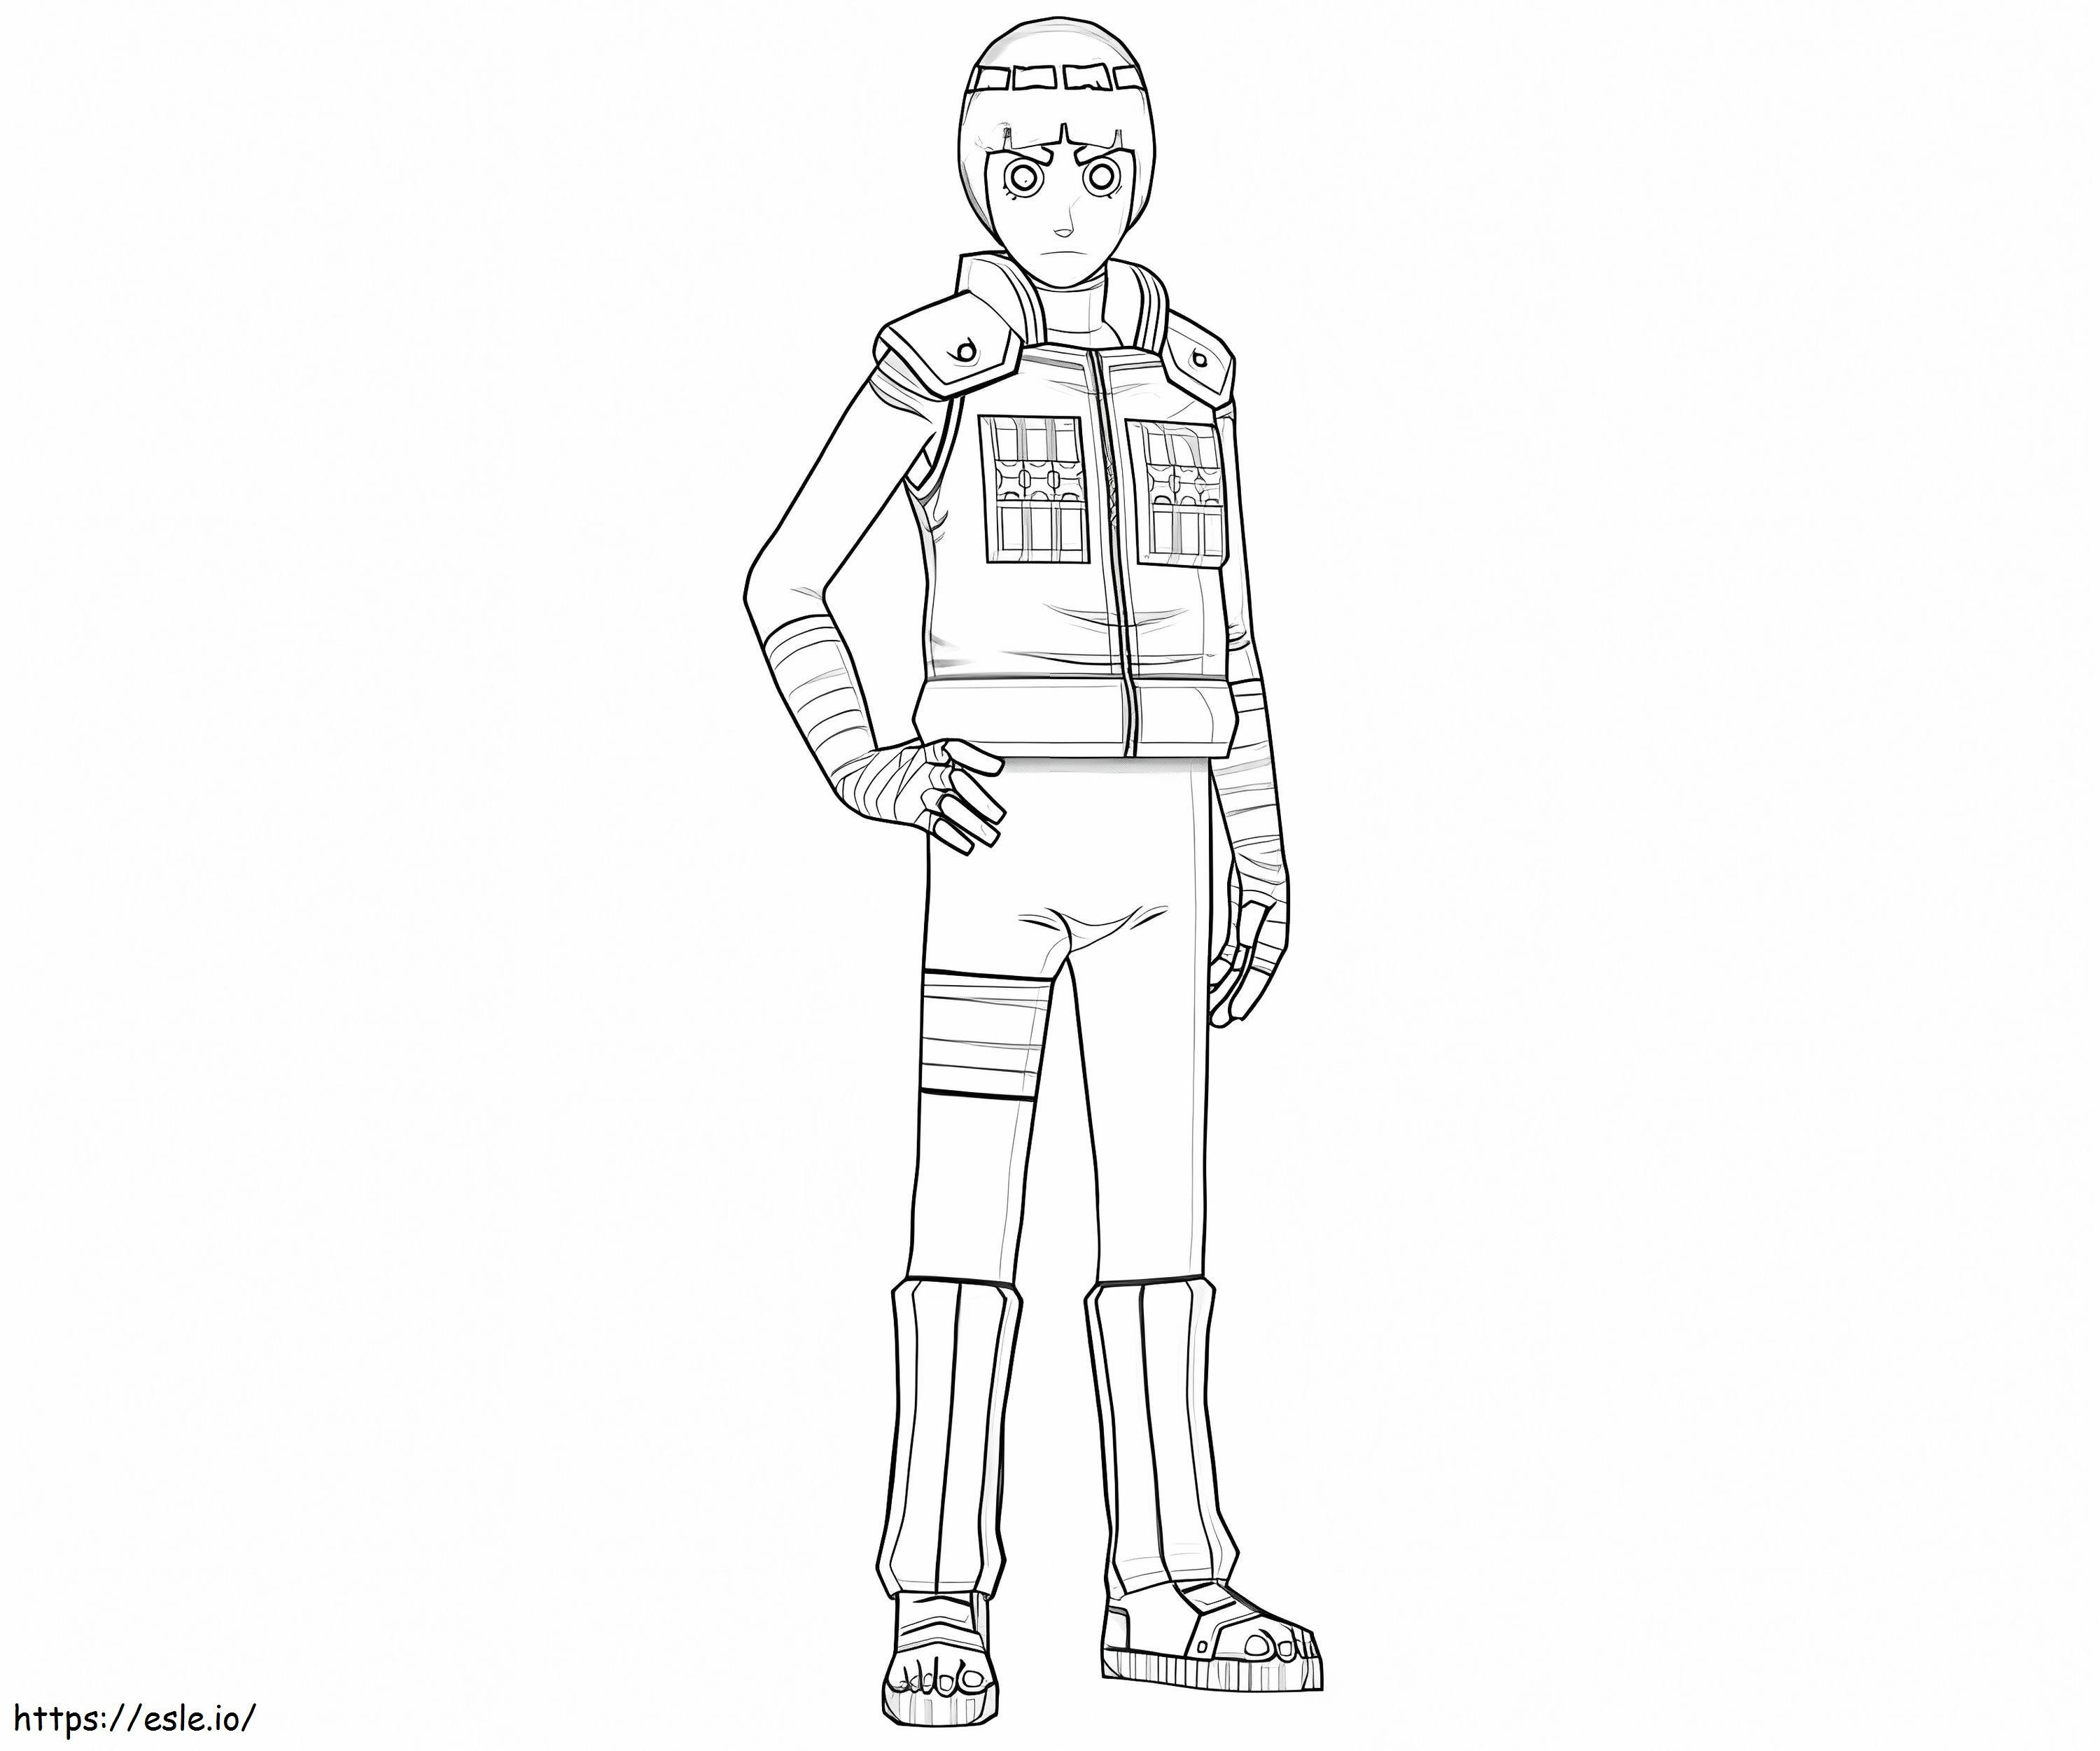 Awesome Rock Lee coloring page